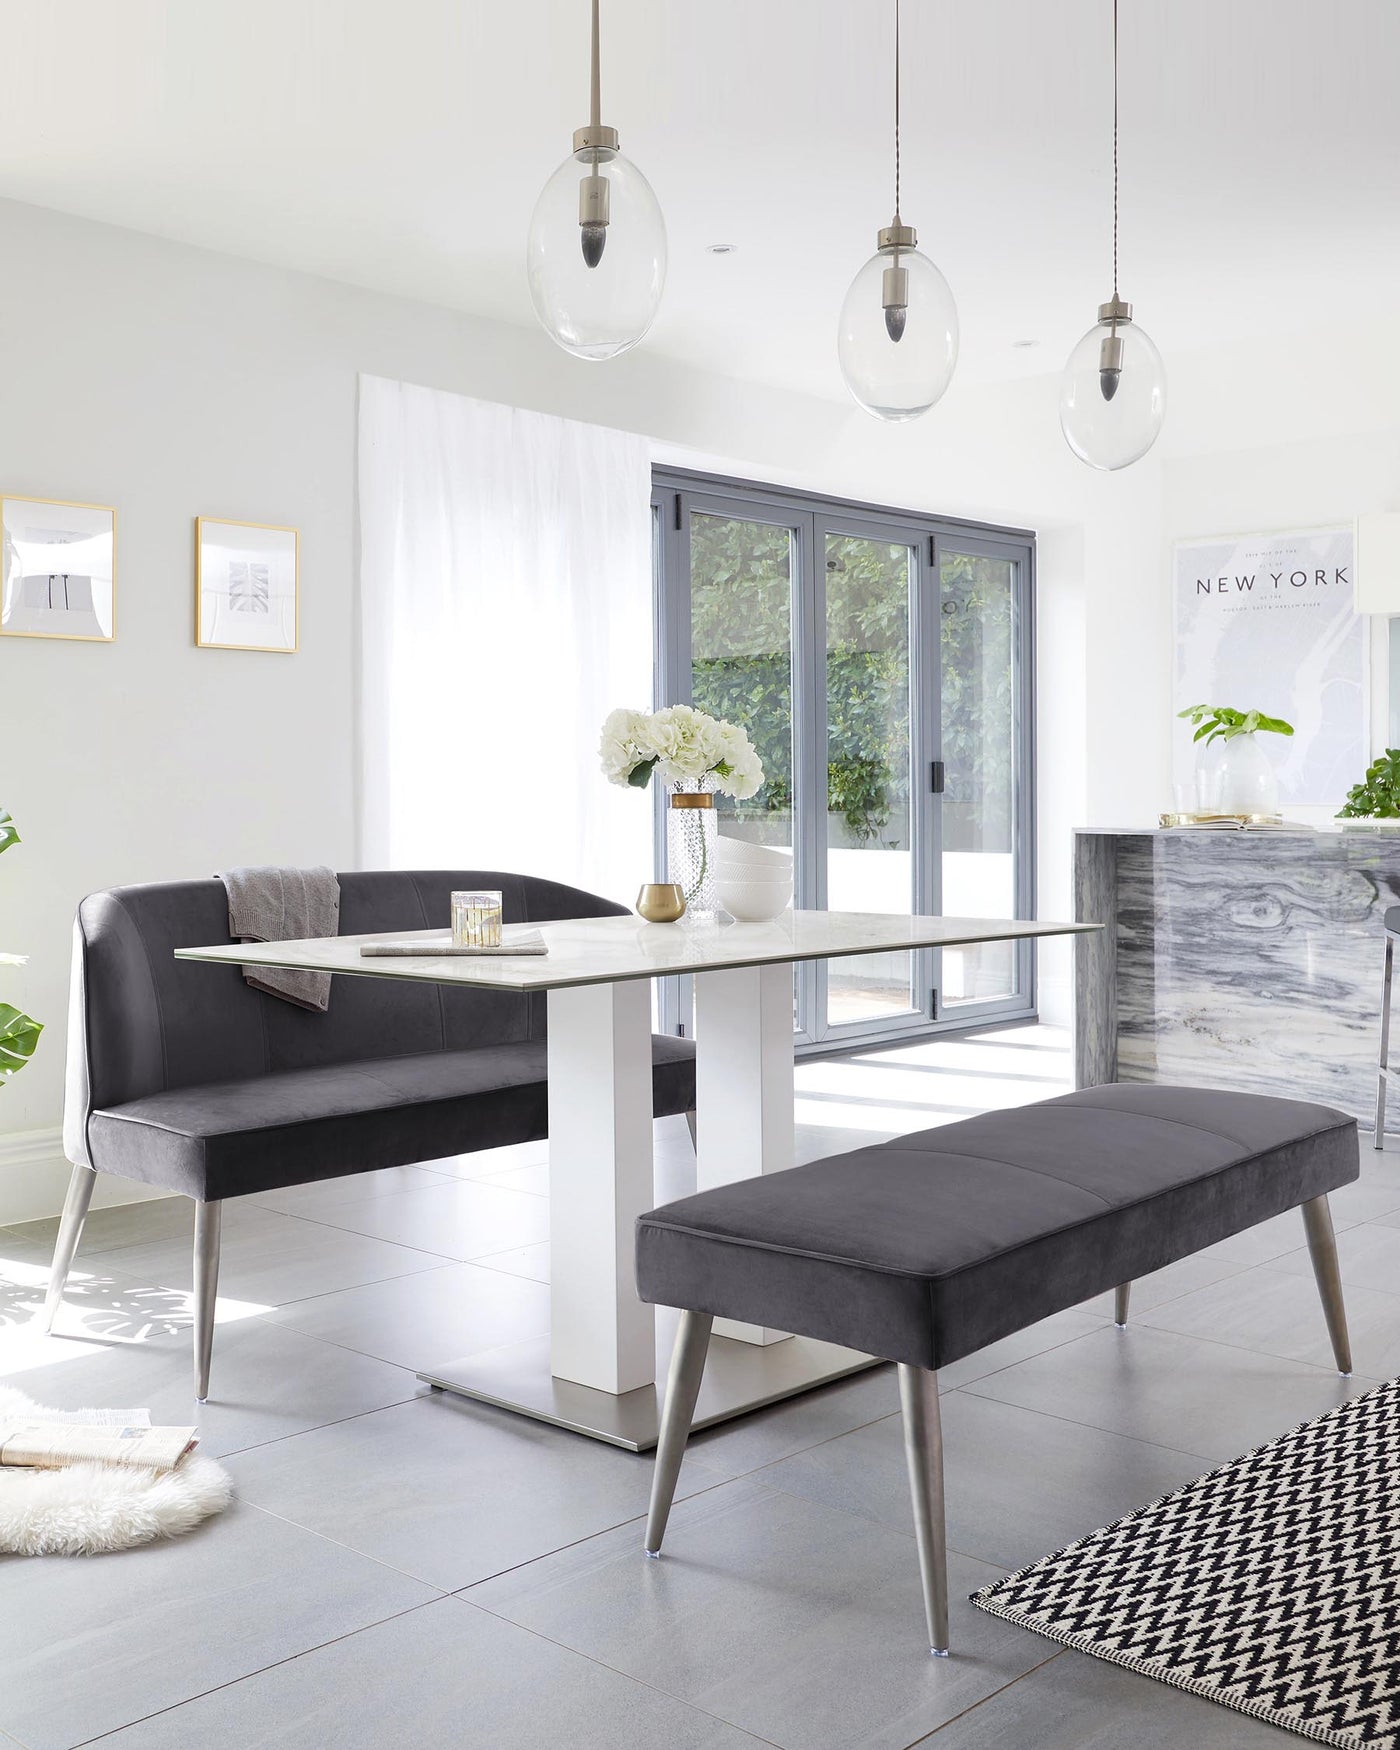 Modern dining room furniture featuring a rectangular white dining table with a glossy finish and sleek metallic accents, paired with a grey upholstered L-shaped dining bench and a matching rectangular ottoman-style bench with metal legs.